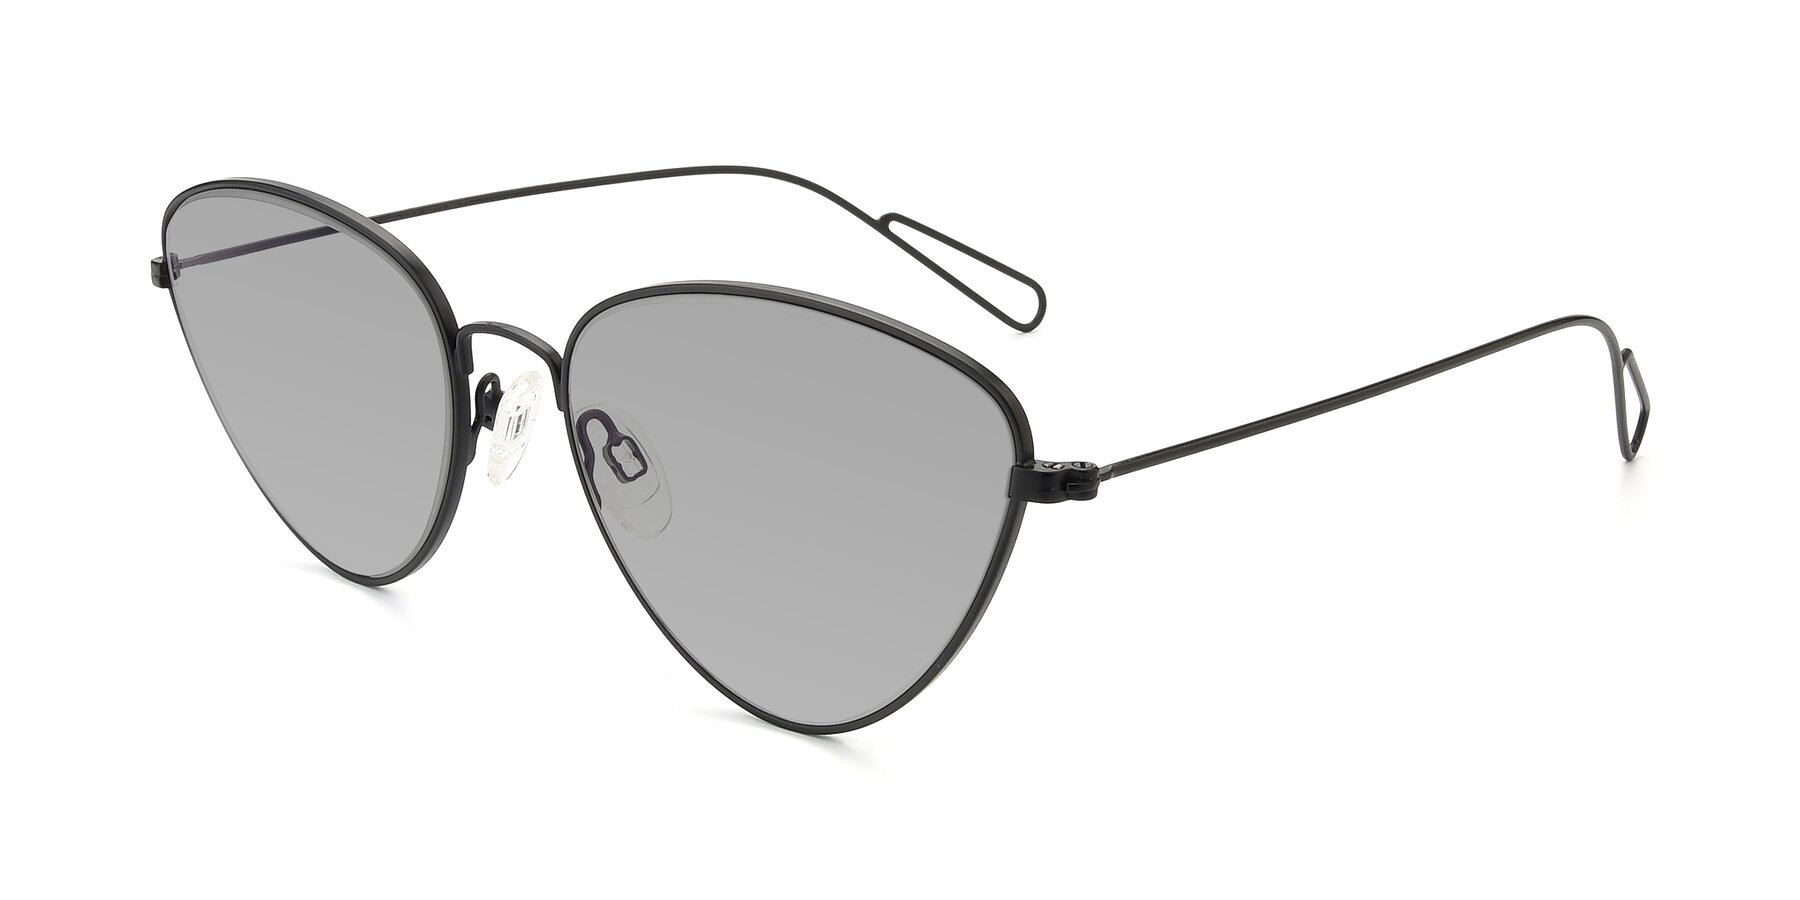 Angle of Butterfly Effect in Black with Light Gray Tinted Lenses